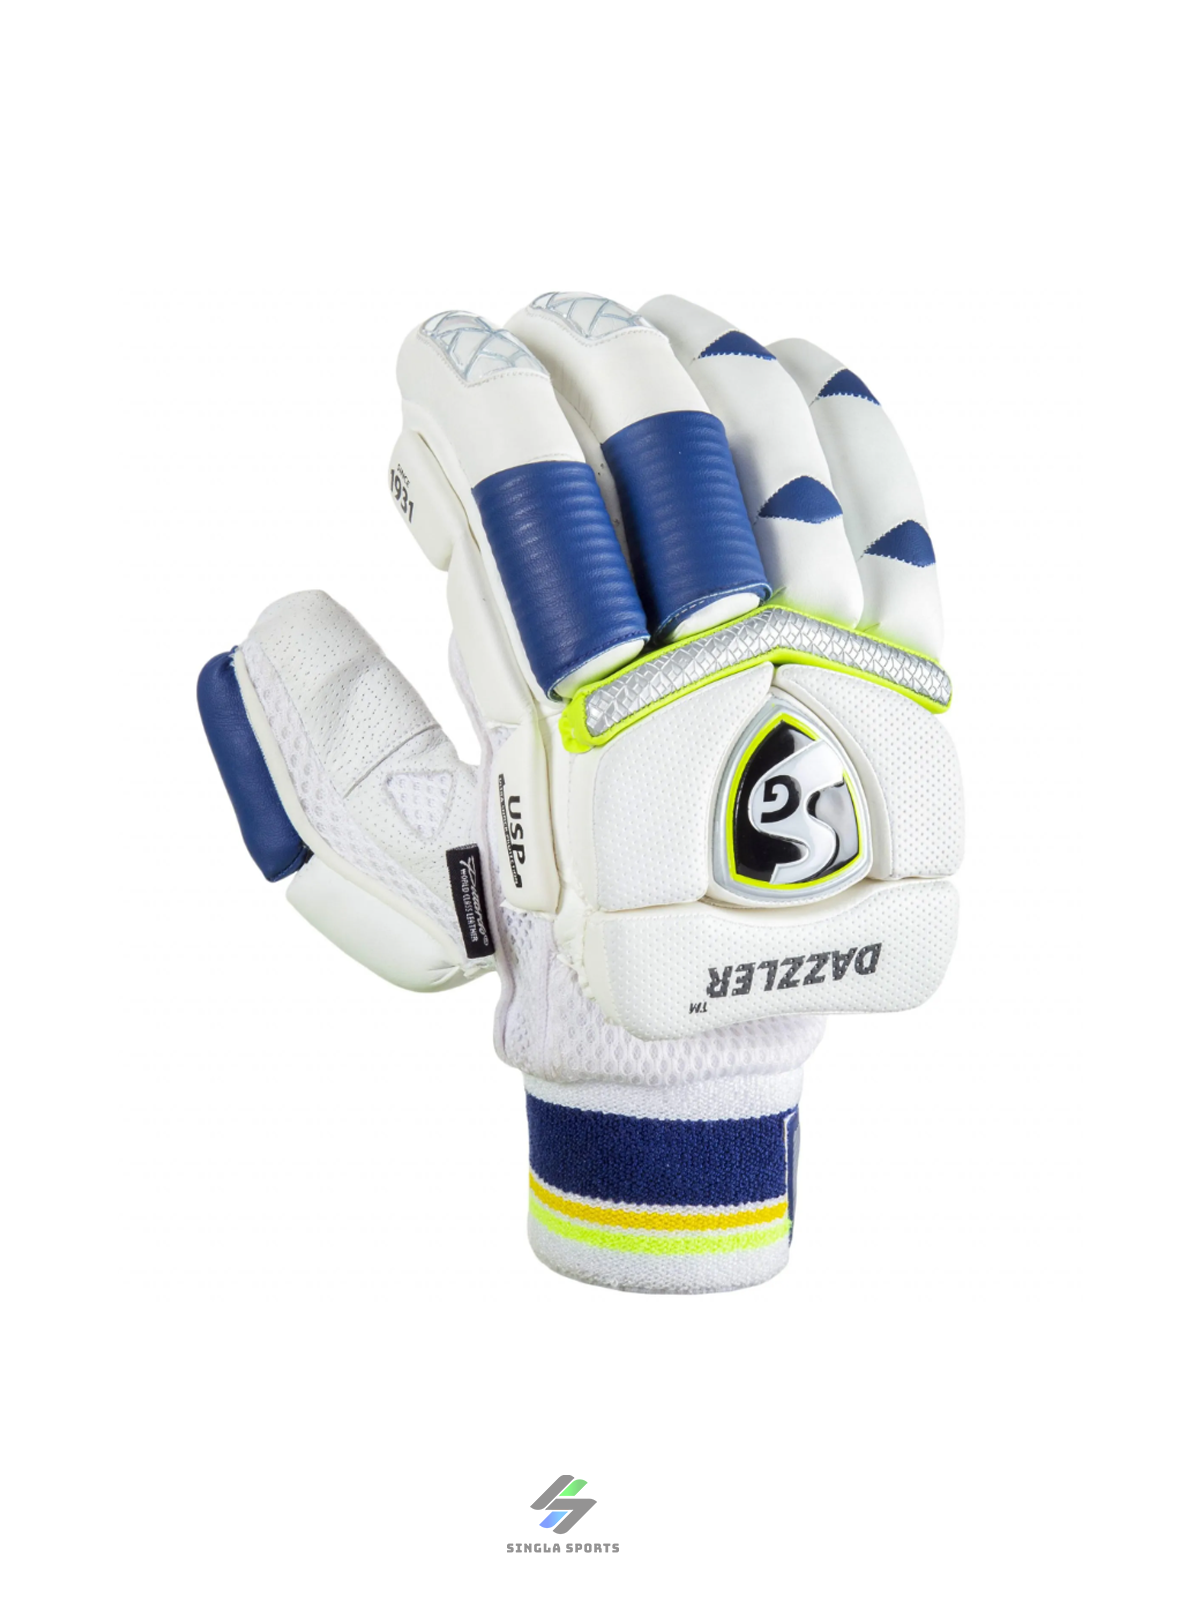 SG Dazzler Batting Gloves with Premium Quality Leather Palm